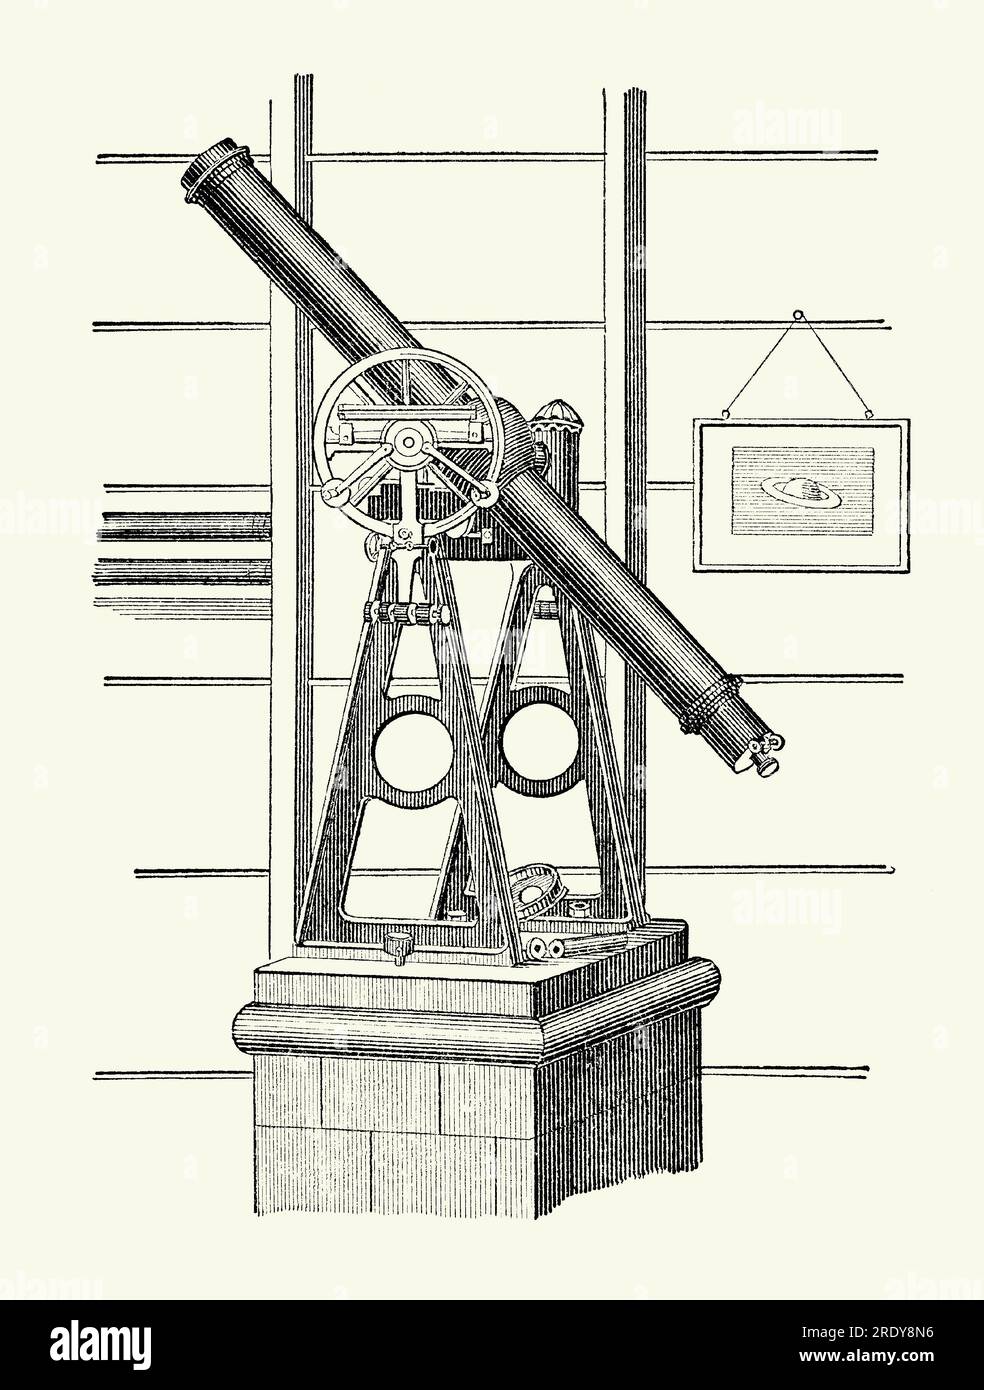 An old engraving of a Victorian ‘Transit Instrument’. It is from a mechanical engineering book of the 1880s. This transit instrument is a telescope pivoted on a stand moving in one plane. It is used to measure the positions of celestial objects as they transit a pre-defined point. This one was owned by the UK astronomer Frederick Brodie (1823–1896). Brodie, a Fellow of the Royal Astronomical Society, originally placed in an observatory in Uckfield, Sussex, England, UK. It was then transferred to his observatory at Fernhill, Isle of Wight. Brodie mainly observed sun spots and star clusters. Stock Photo